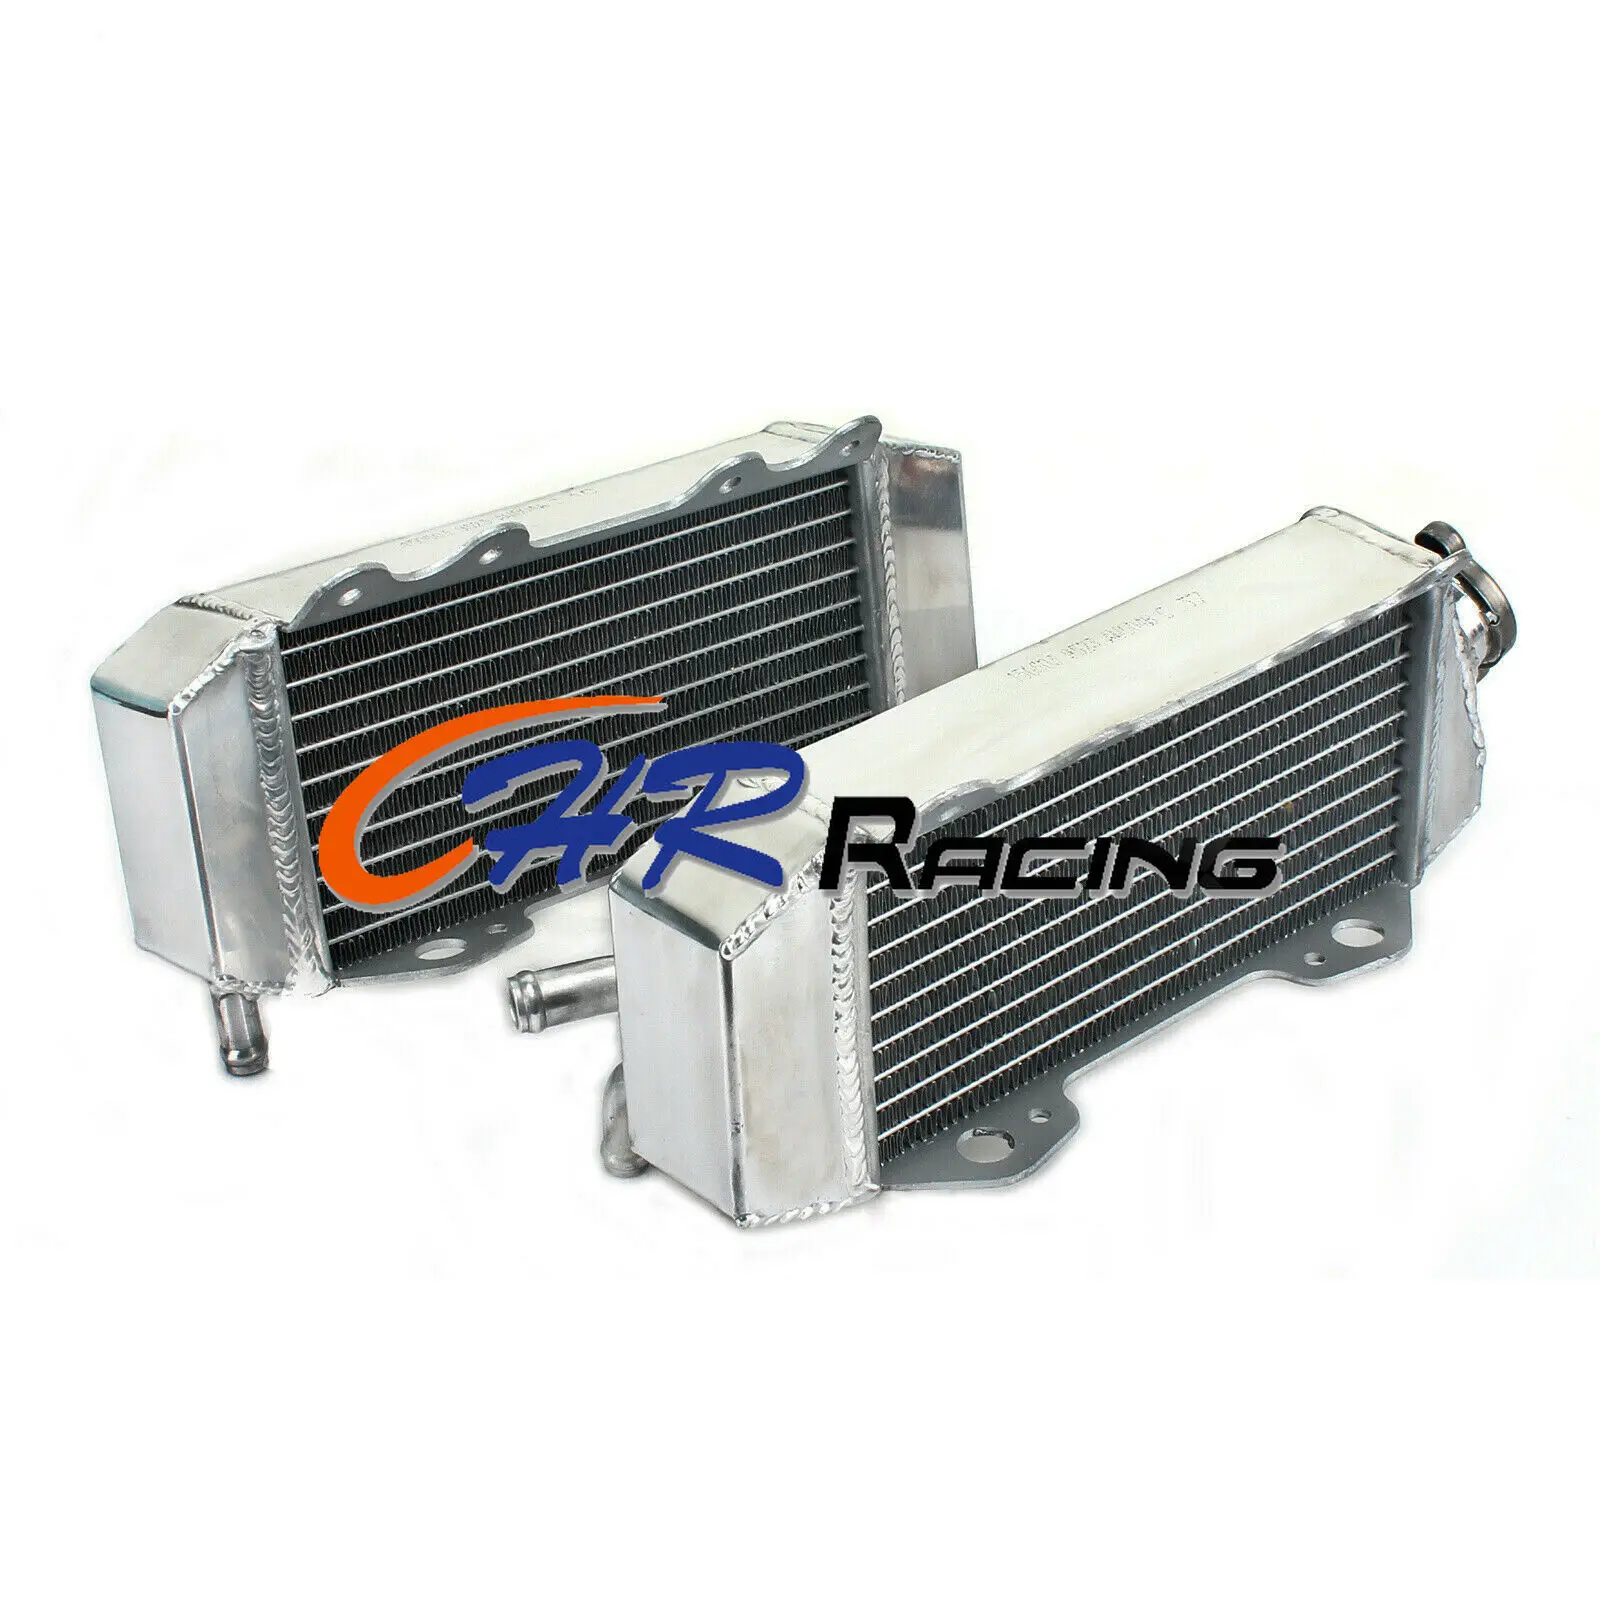 

32mm Aluminum Alloy Motorcycle Radiator For Yamaha WR250F YZF250 2001 2002 2003 2004 2005 2006 Brand New